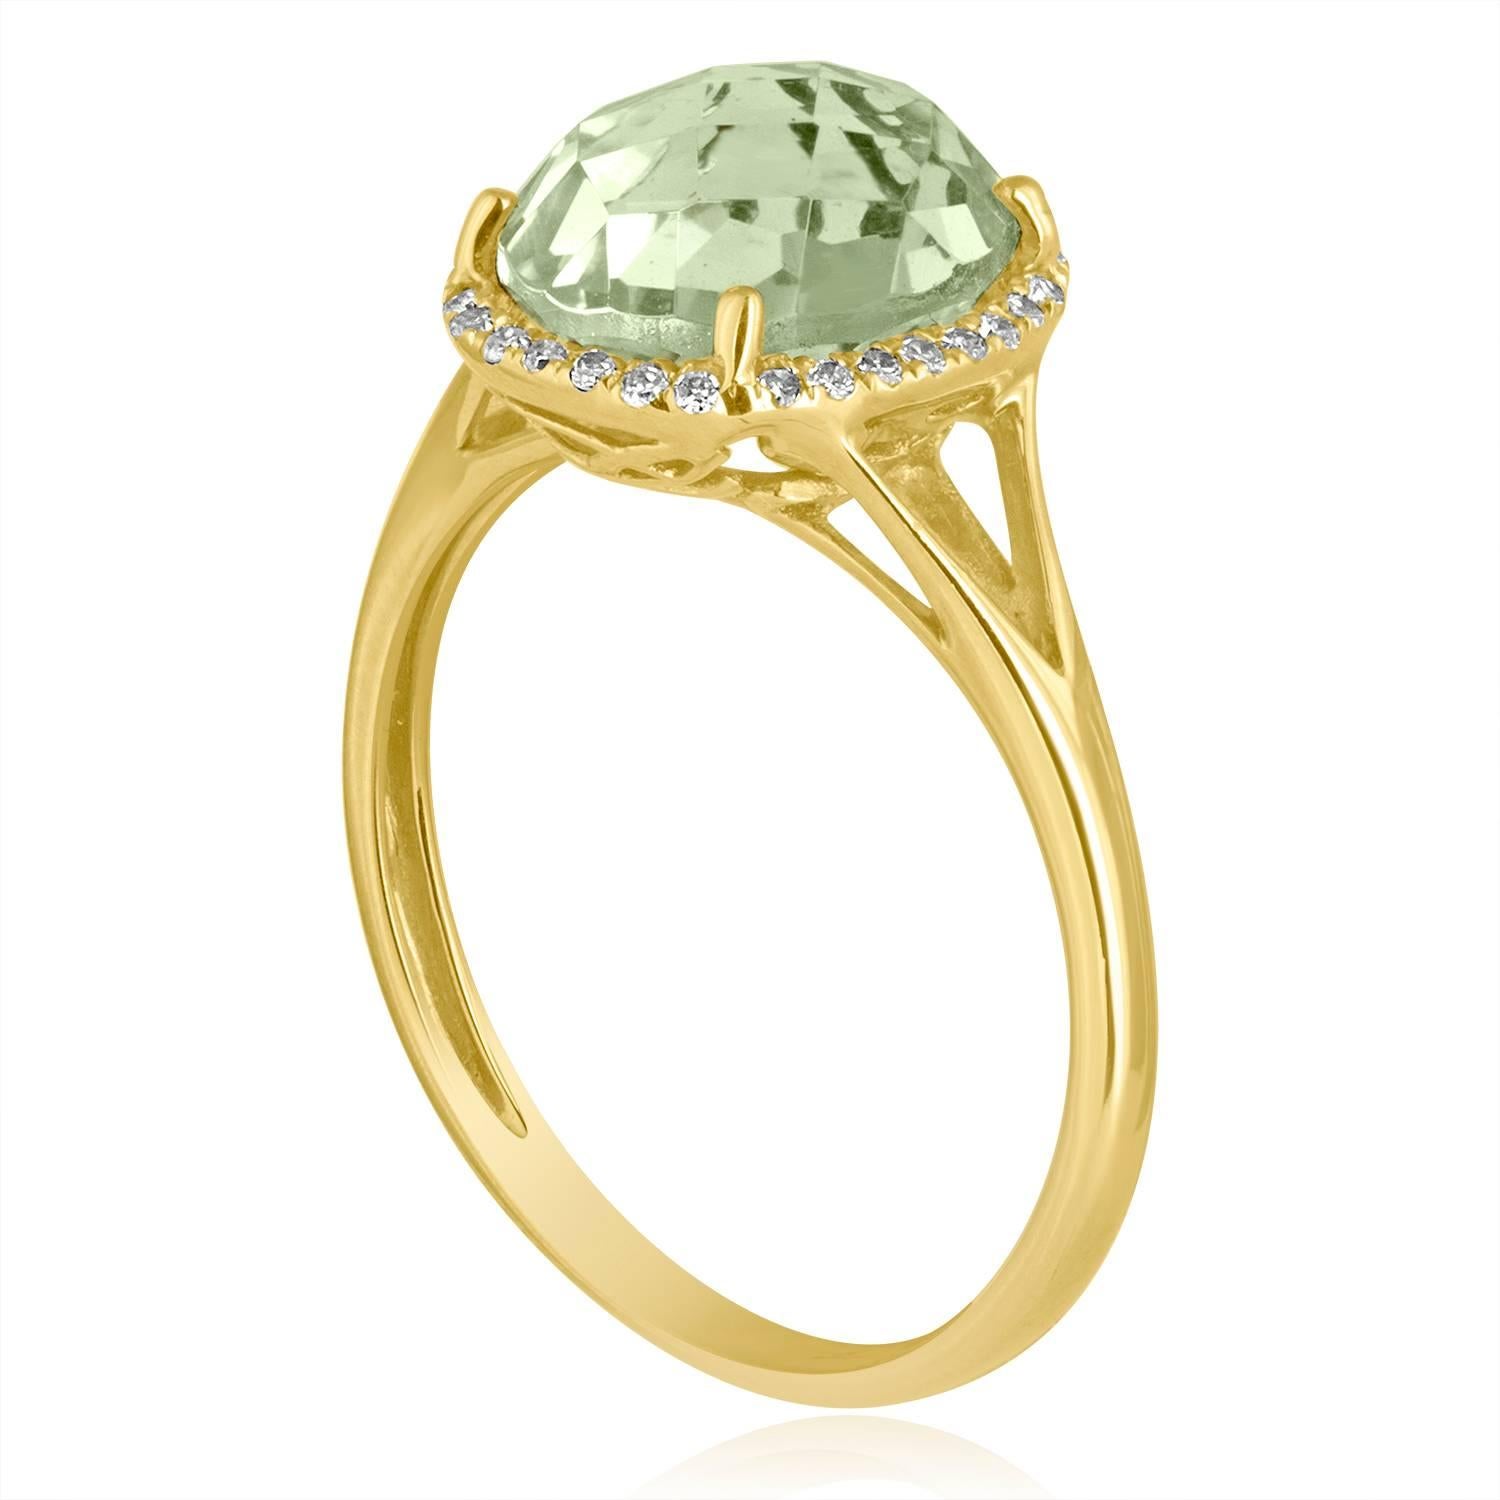 Beautifully Playful Halo Ring
The ring is 14K Yellow Gold
There are 0.10 Carats In Diamonds G/H SI
The Center Stone is an Oval Faceted Green Amethyst 2.73 Carats
The ring measures on top 6/16